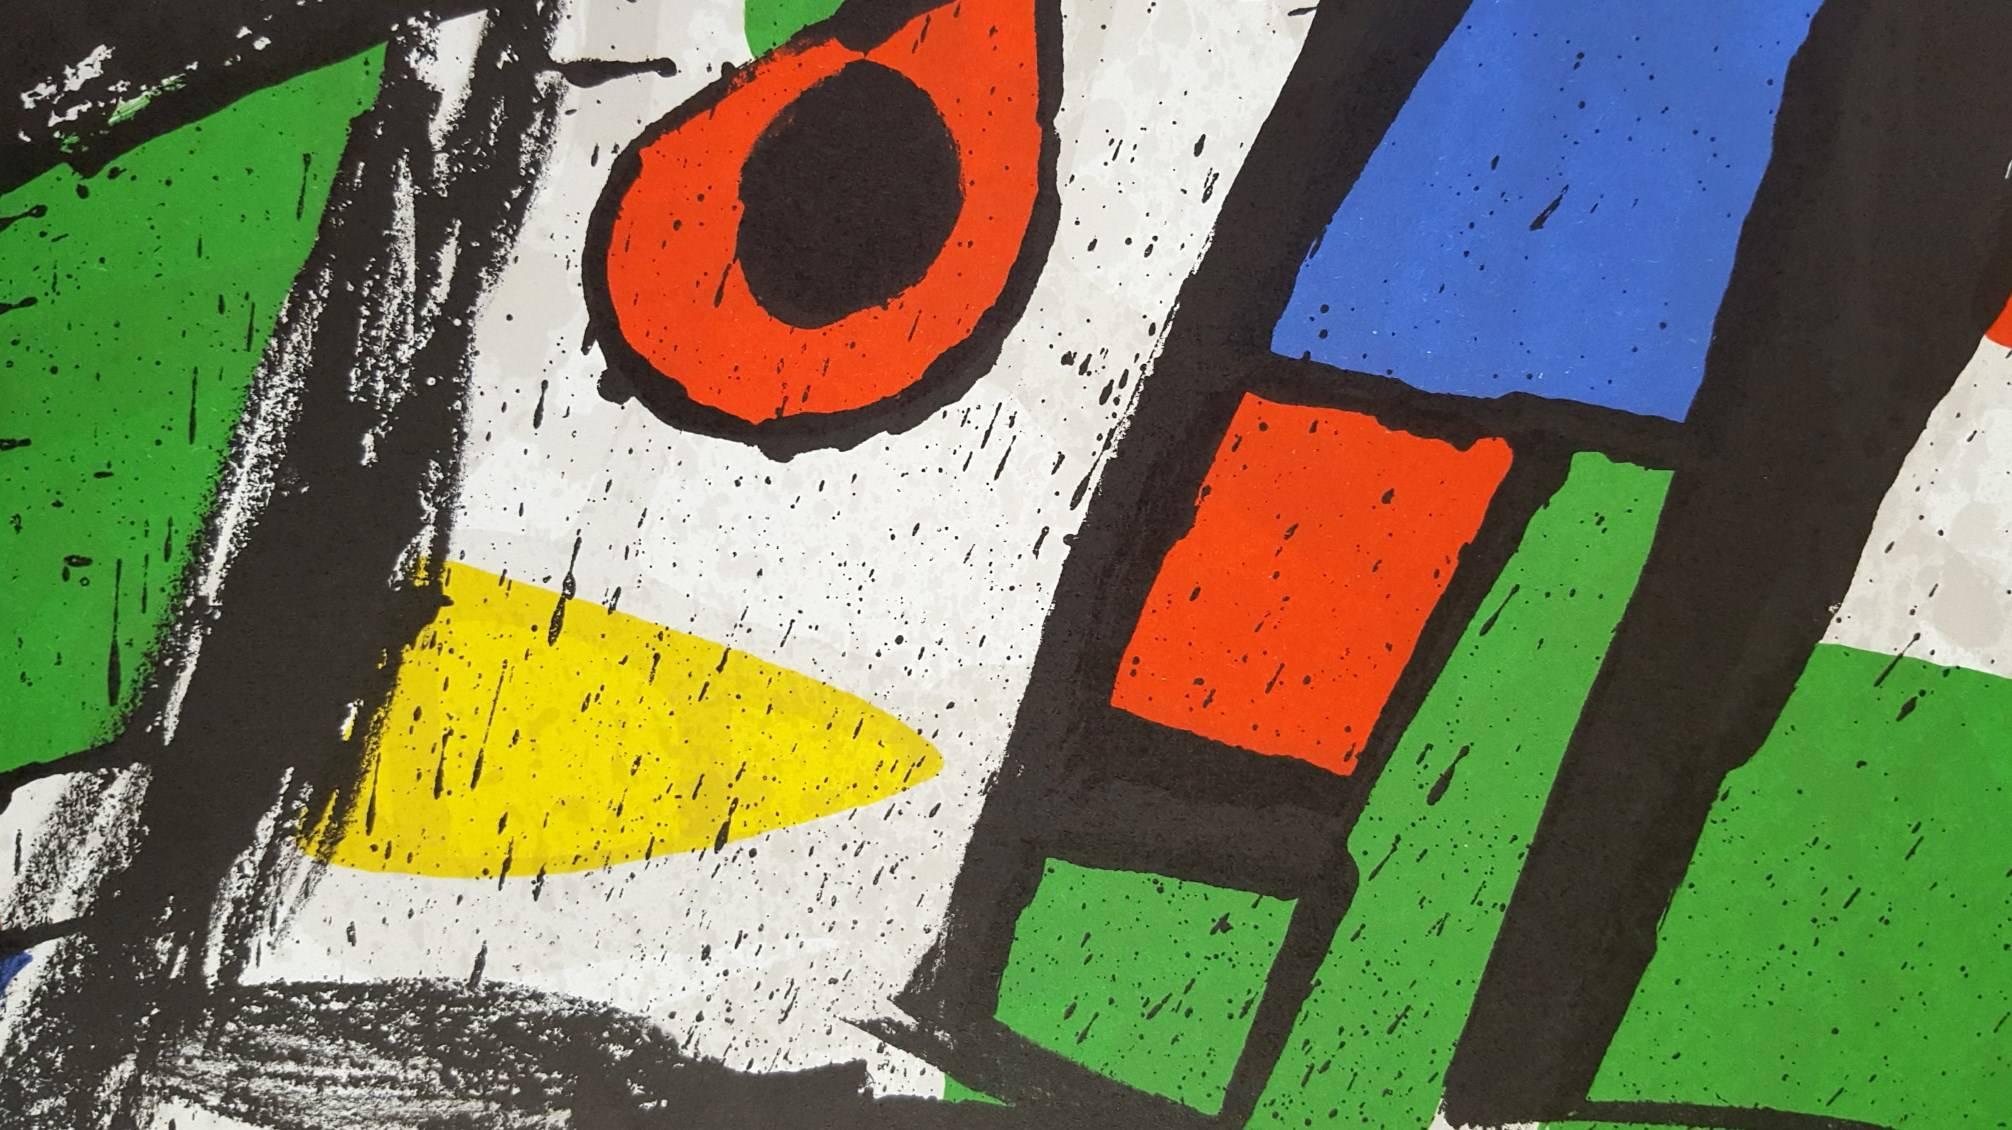 Expo 79 - Galerie Maeght - Surrealist Print by Joan Miró